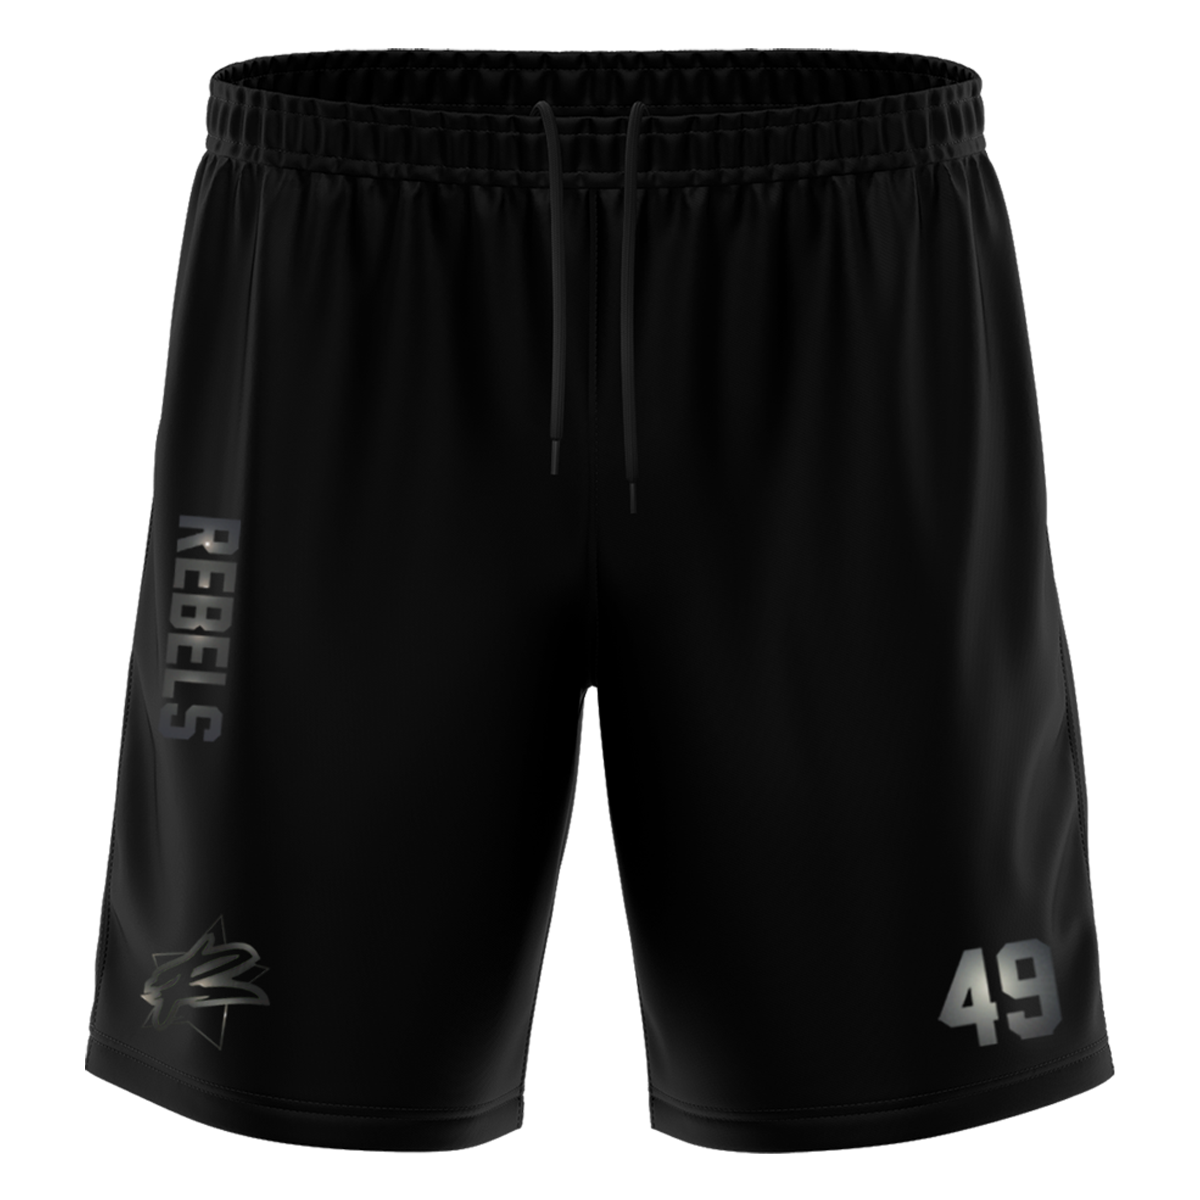 Rebels "Blackline" Training Short with Playernumber or Initials